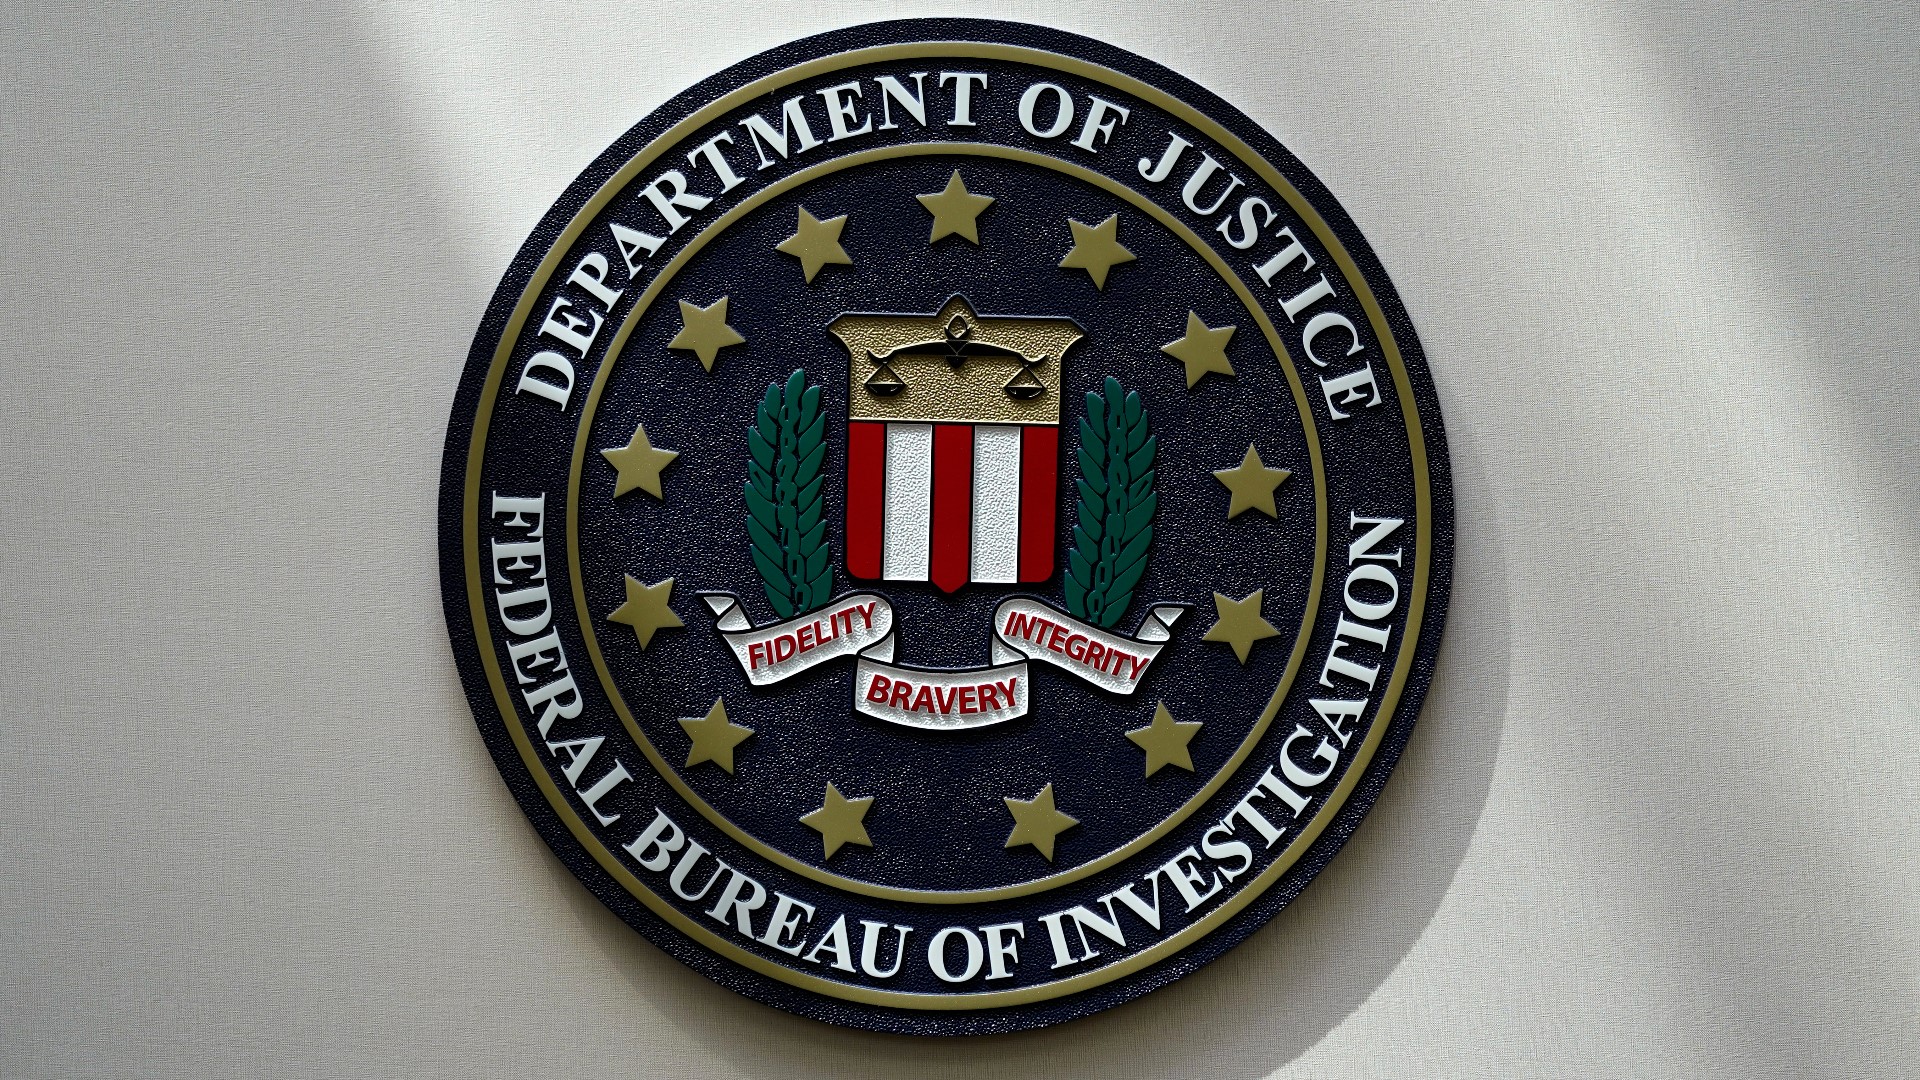 The U.S. Department of Justice believes Jeffrey Gray captured images and videos of children undressing in changing rooms at his photography business.